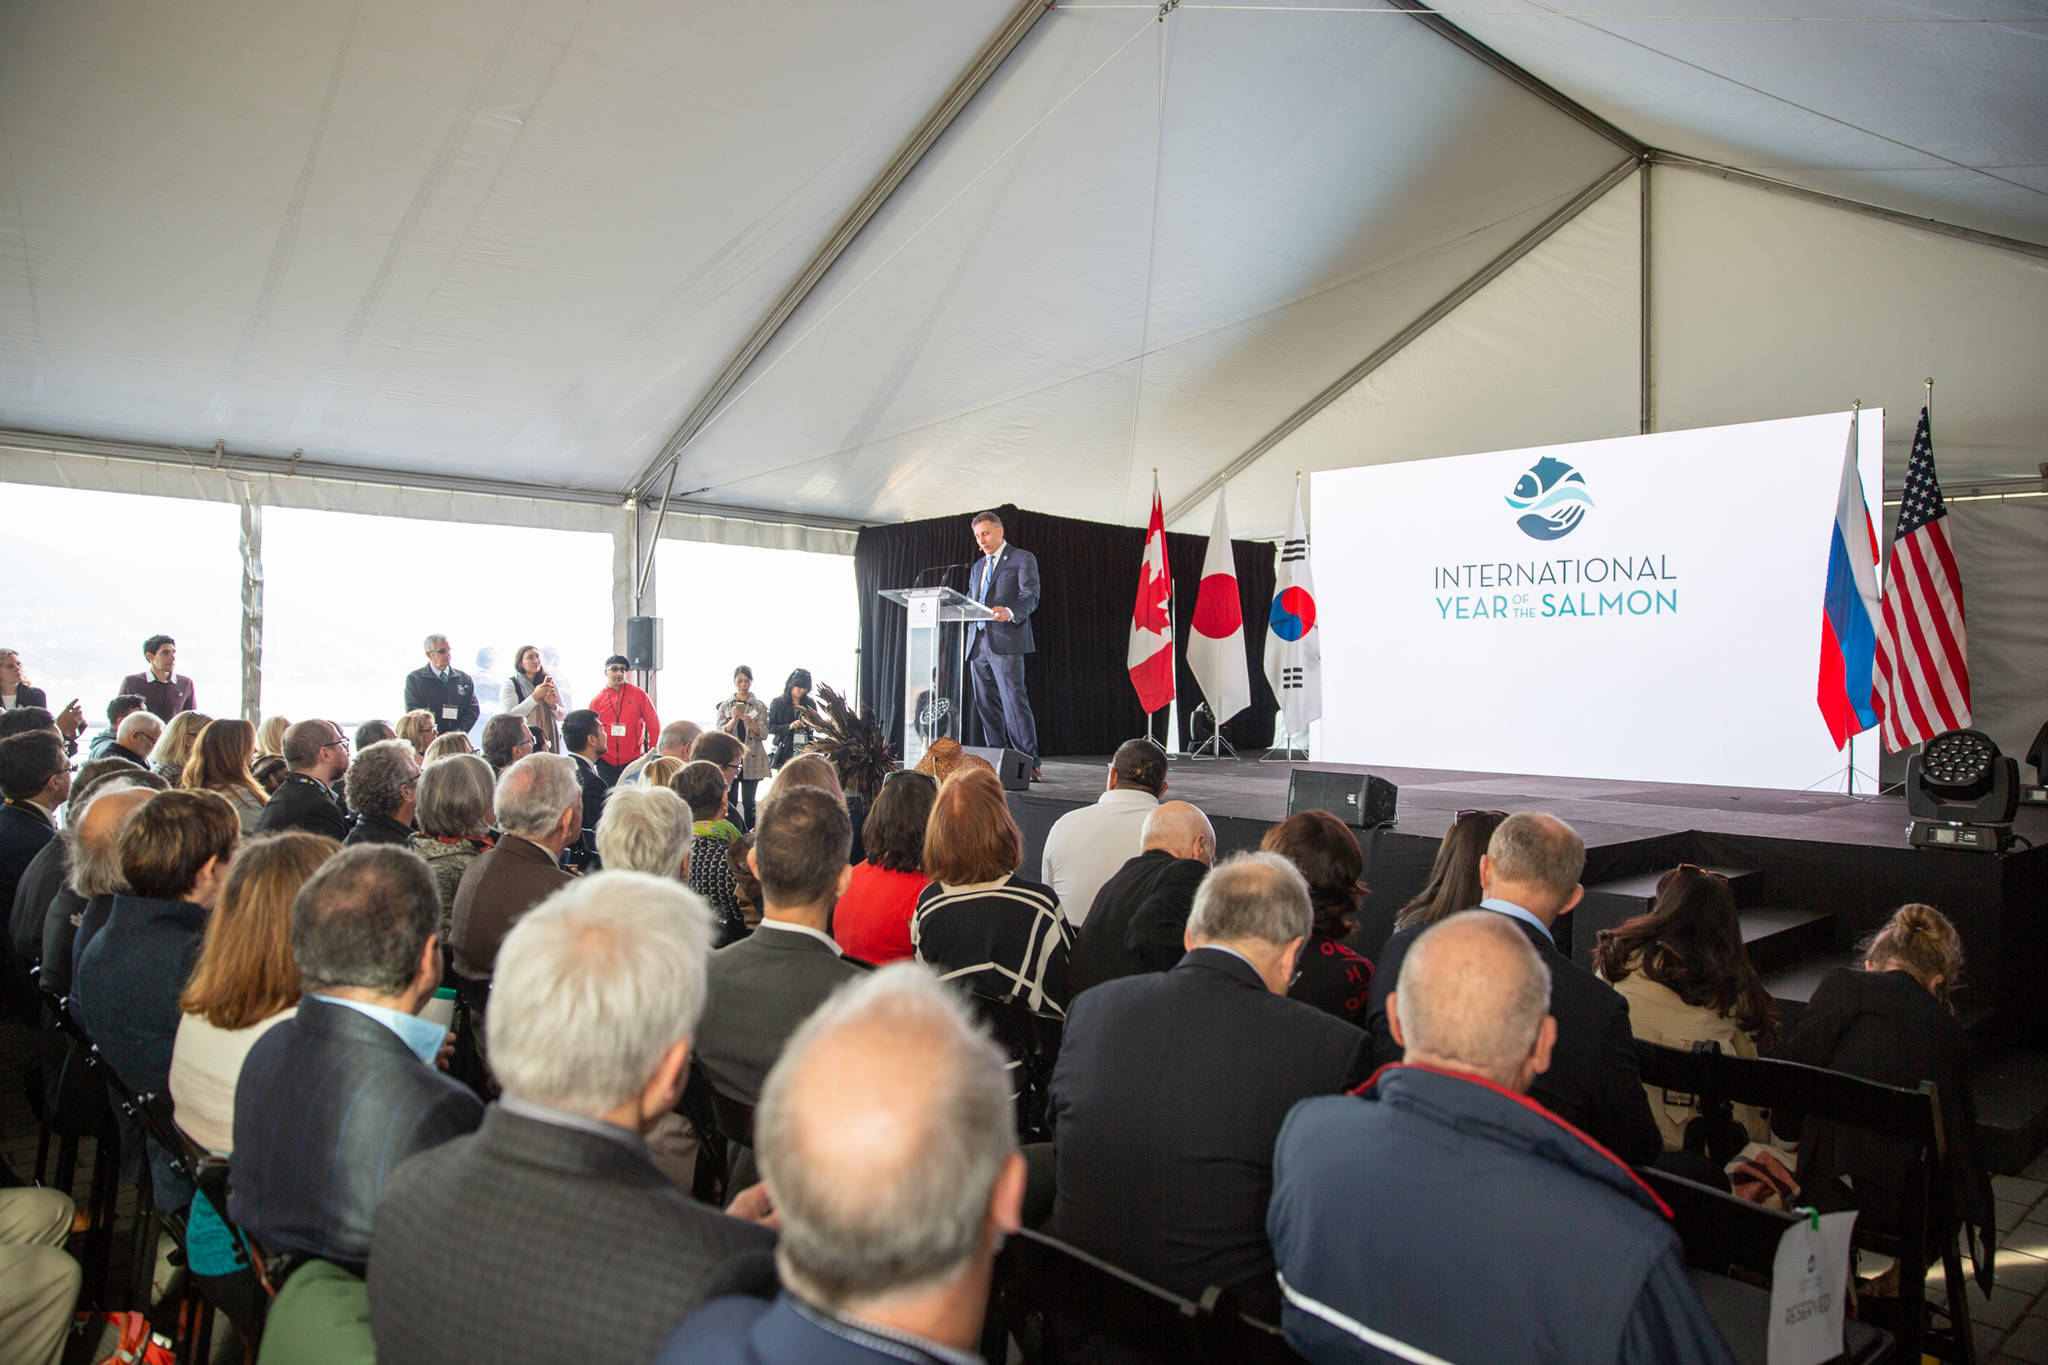 International Year of the Salmon Director for the North Pacific Region Mark Saunders gives an introduction to the International Year of the Salmon at the opening event in October 2018 in Vancouver, British Columbia. (Courtesy Photo)